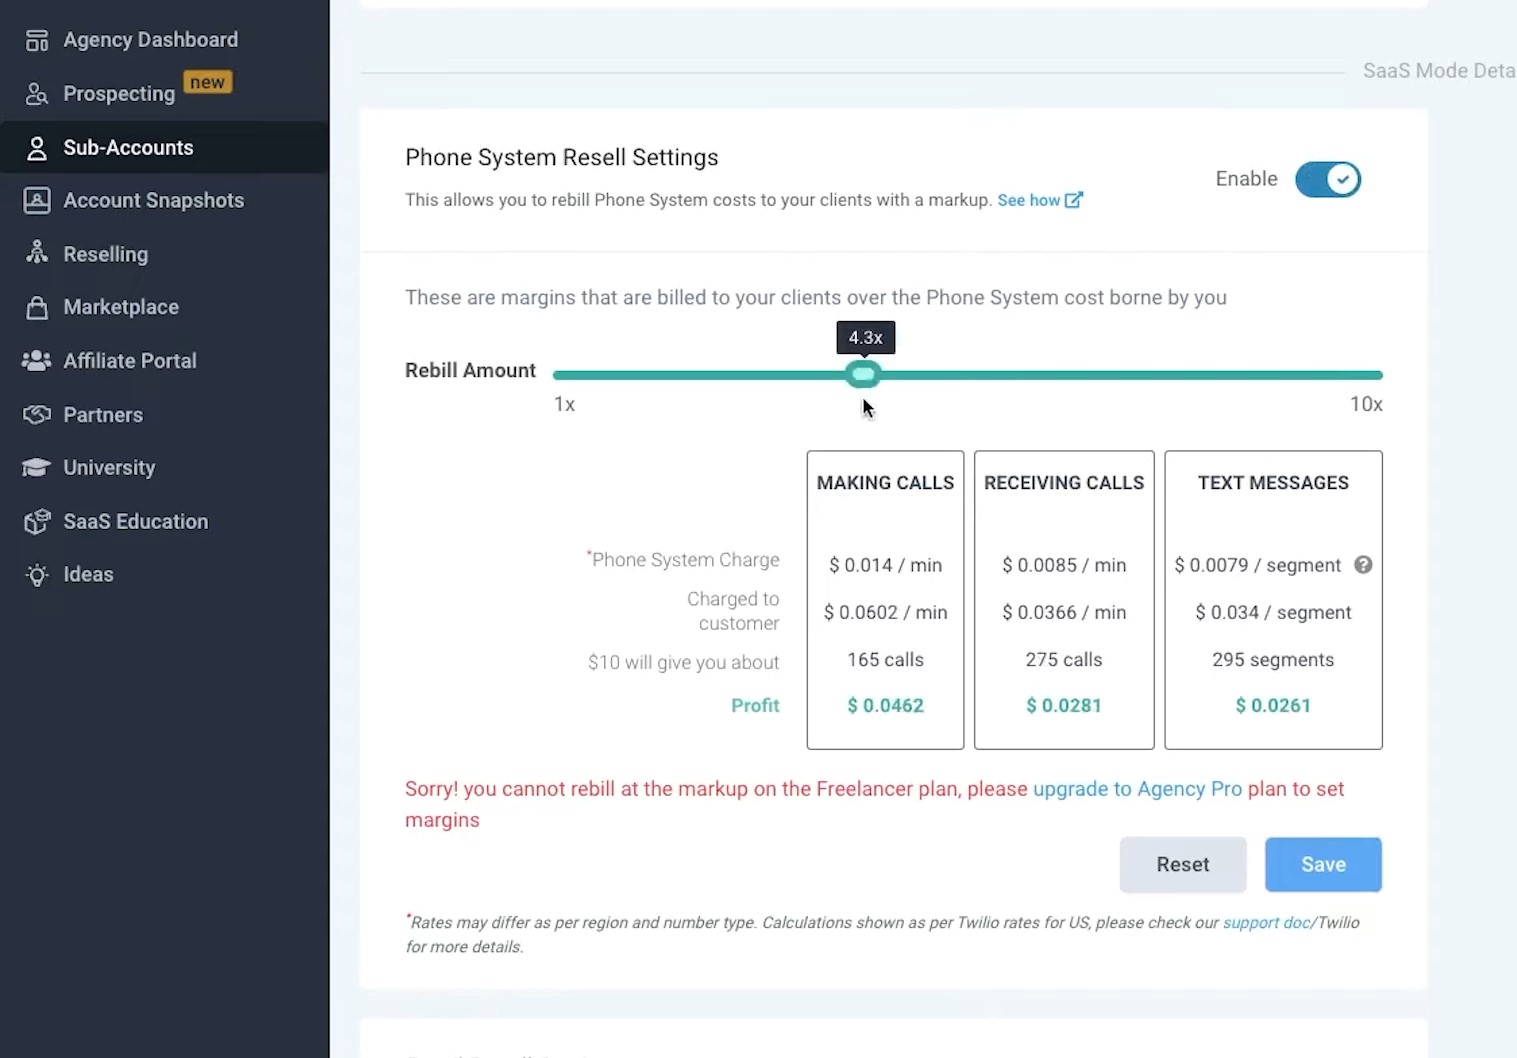 GiHighLevel pricing saas mode settings